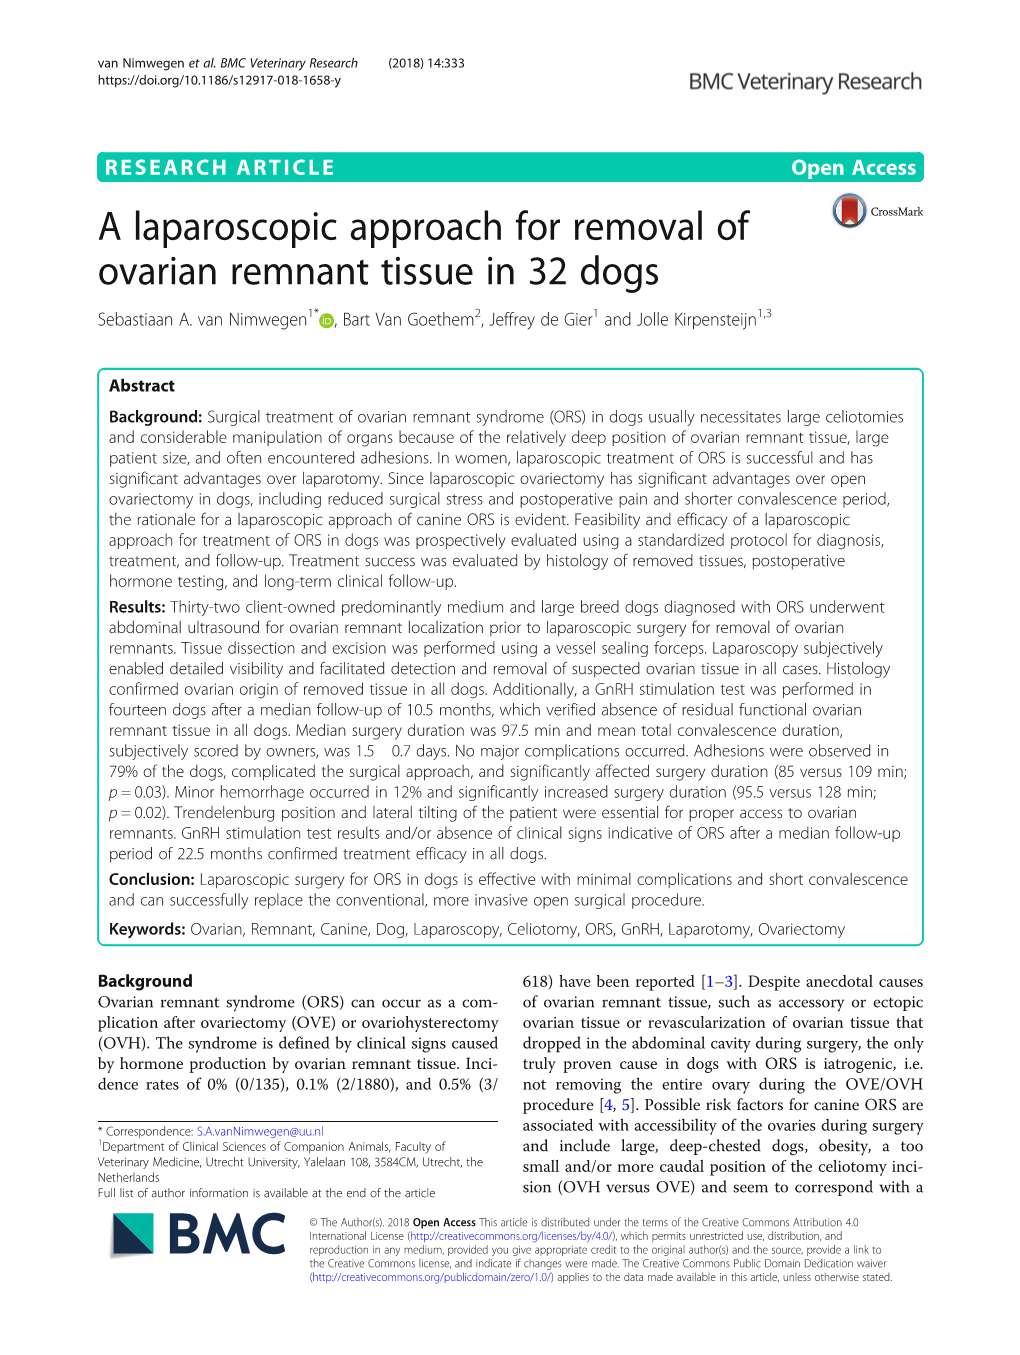 A Laparoscopic Approach for Removal of Ovarian Remnant Tissue in 32 Dogs Sebastiaan A